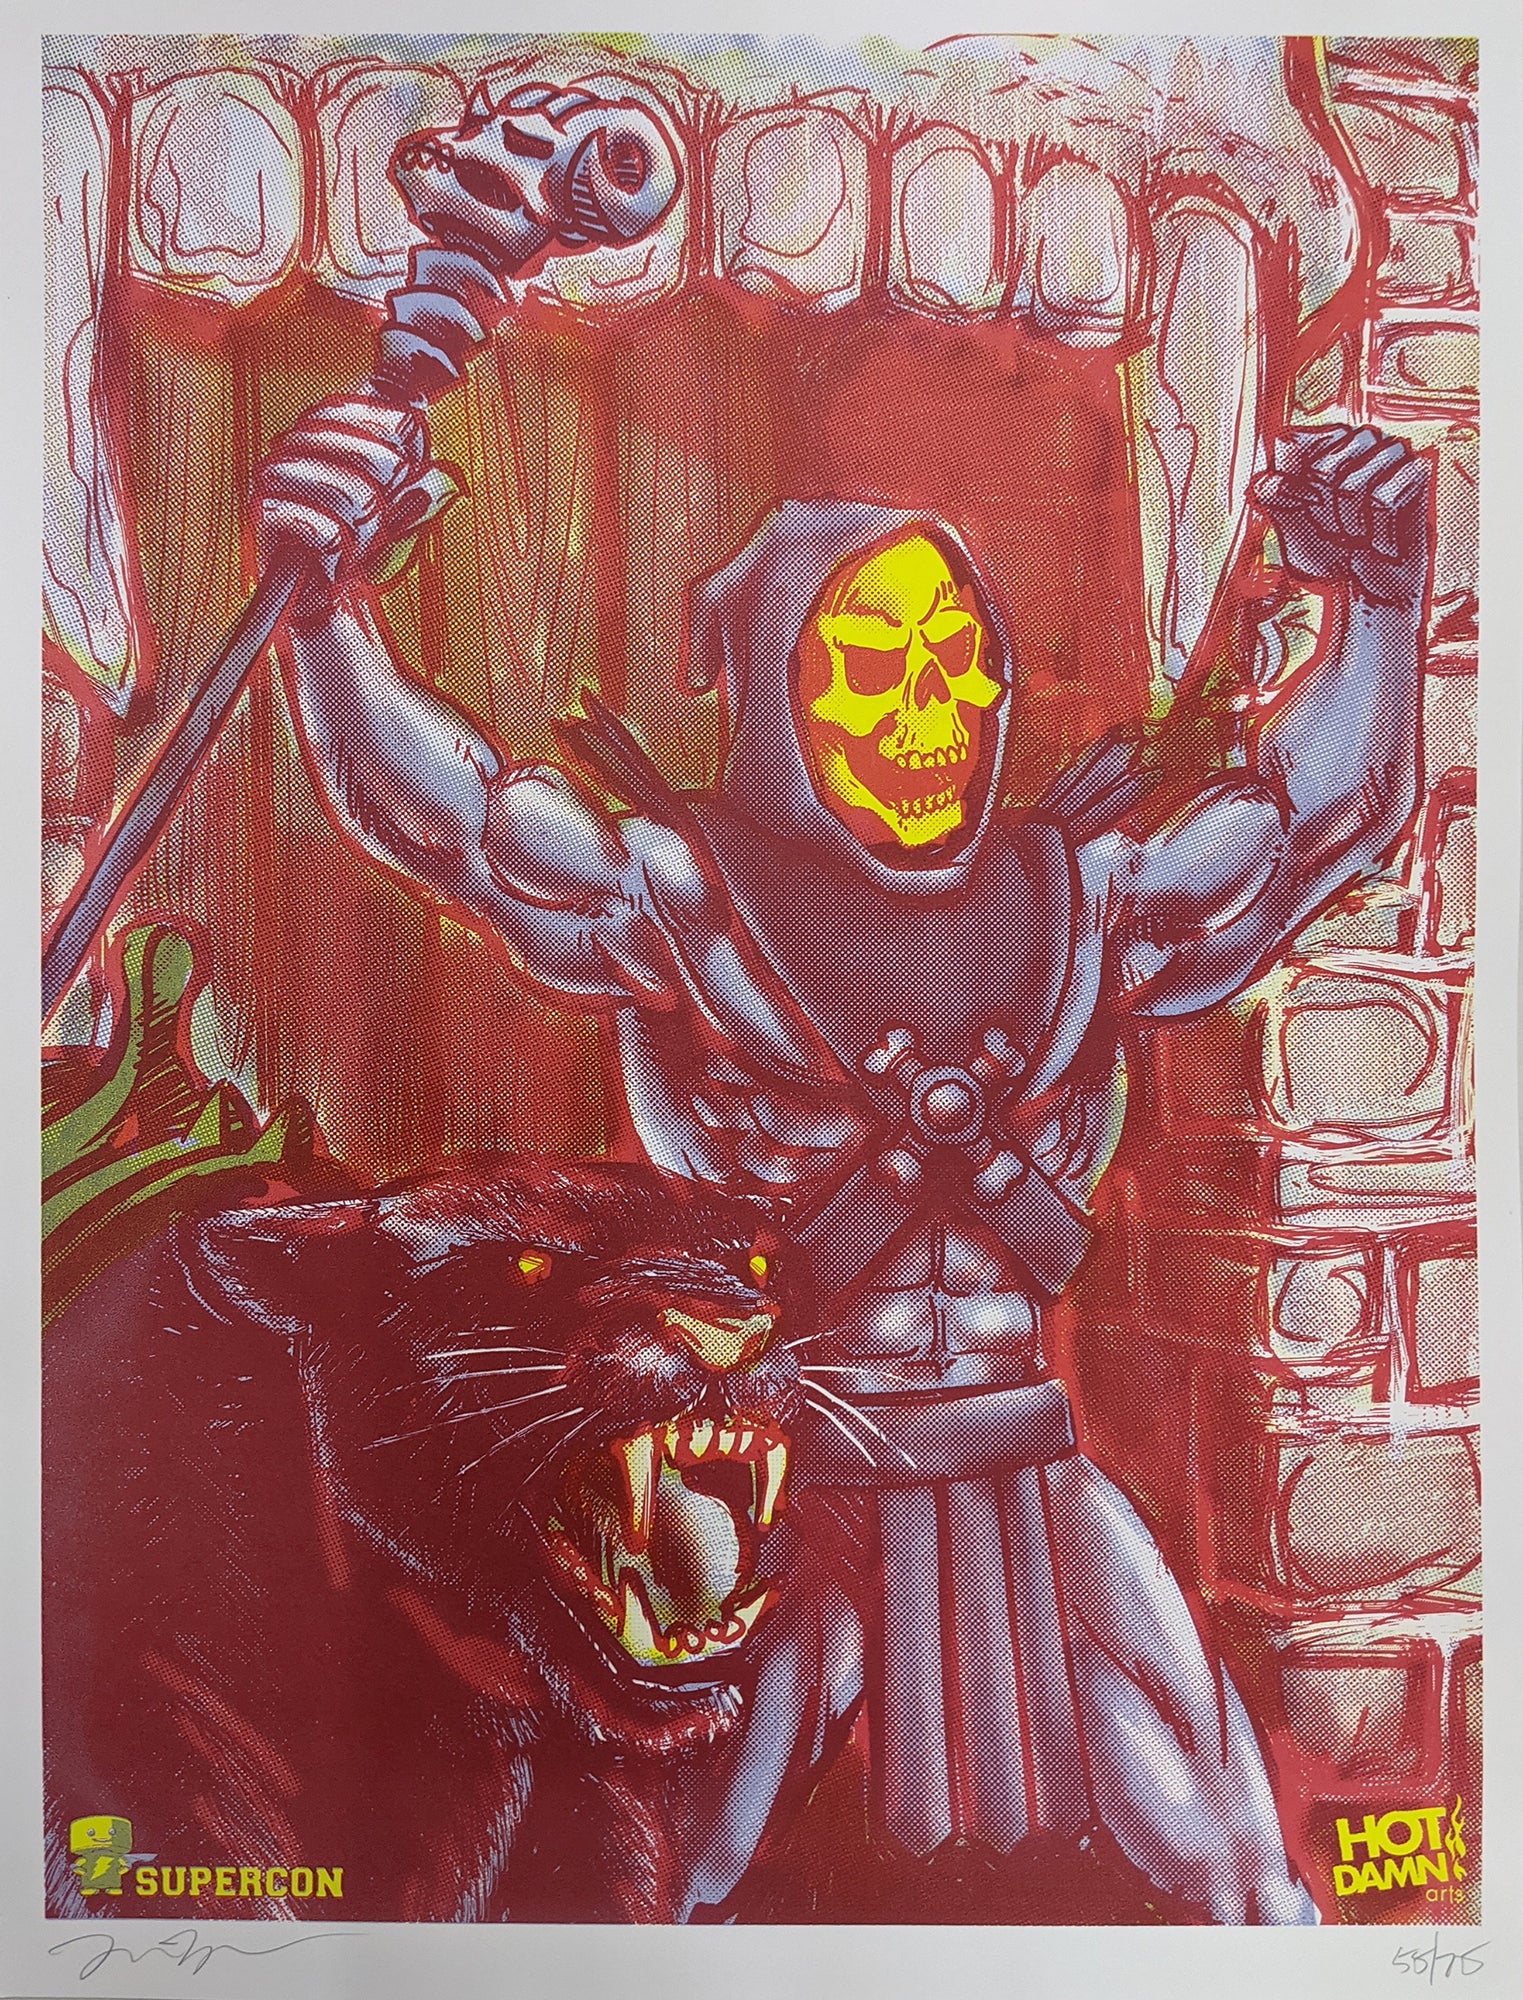 Skeletor 18x24 Lithograph Art Print signed by Dave Berns